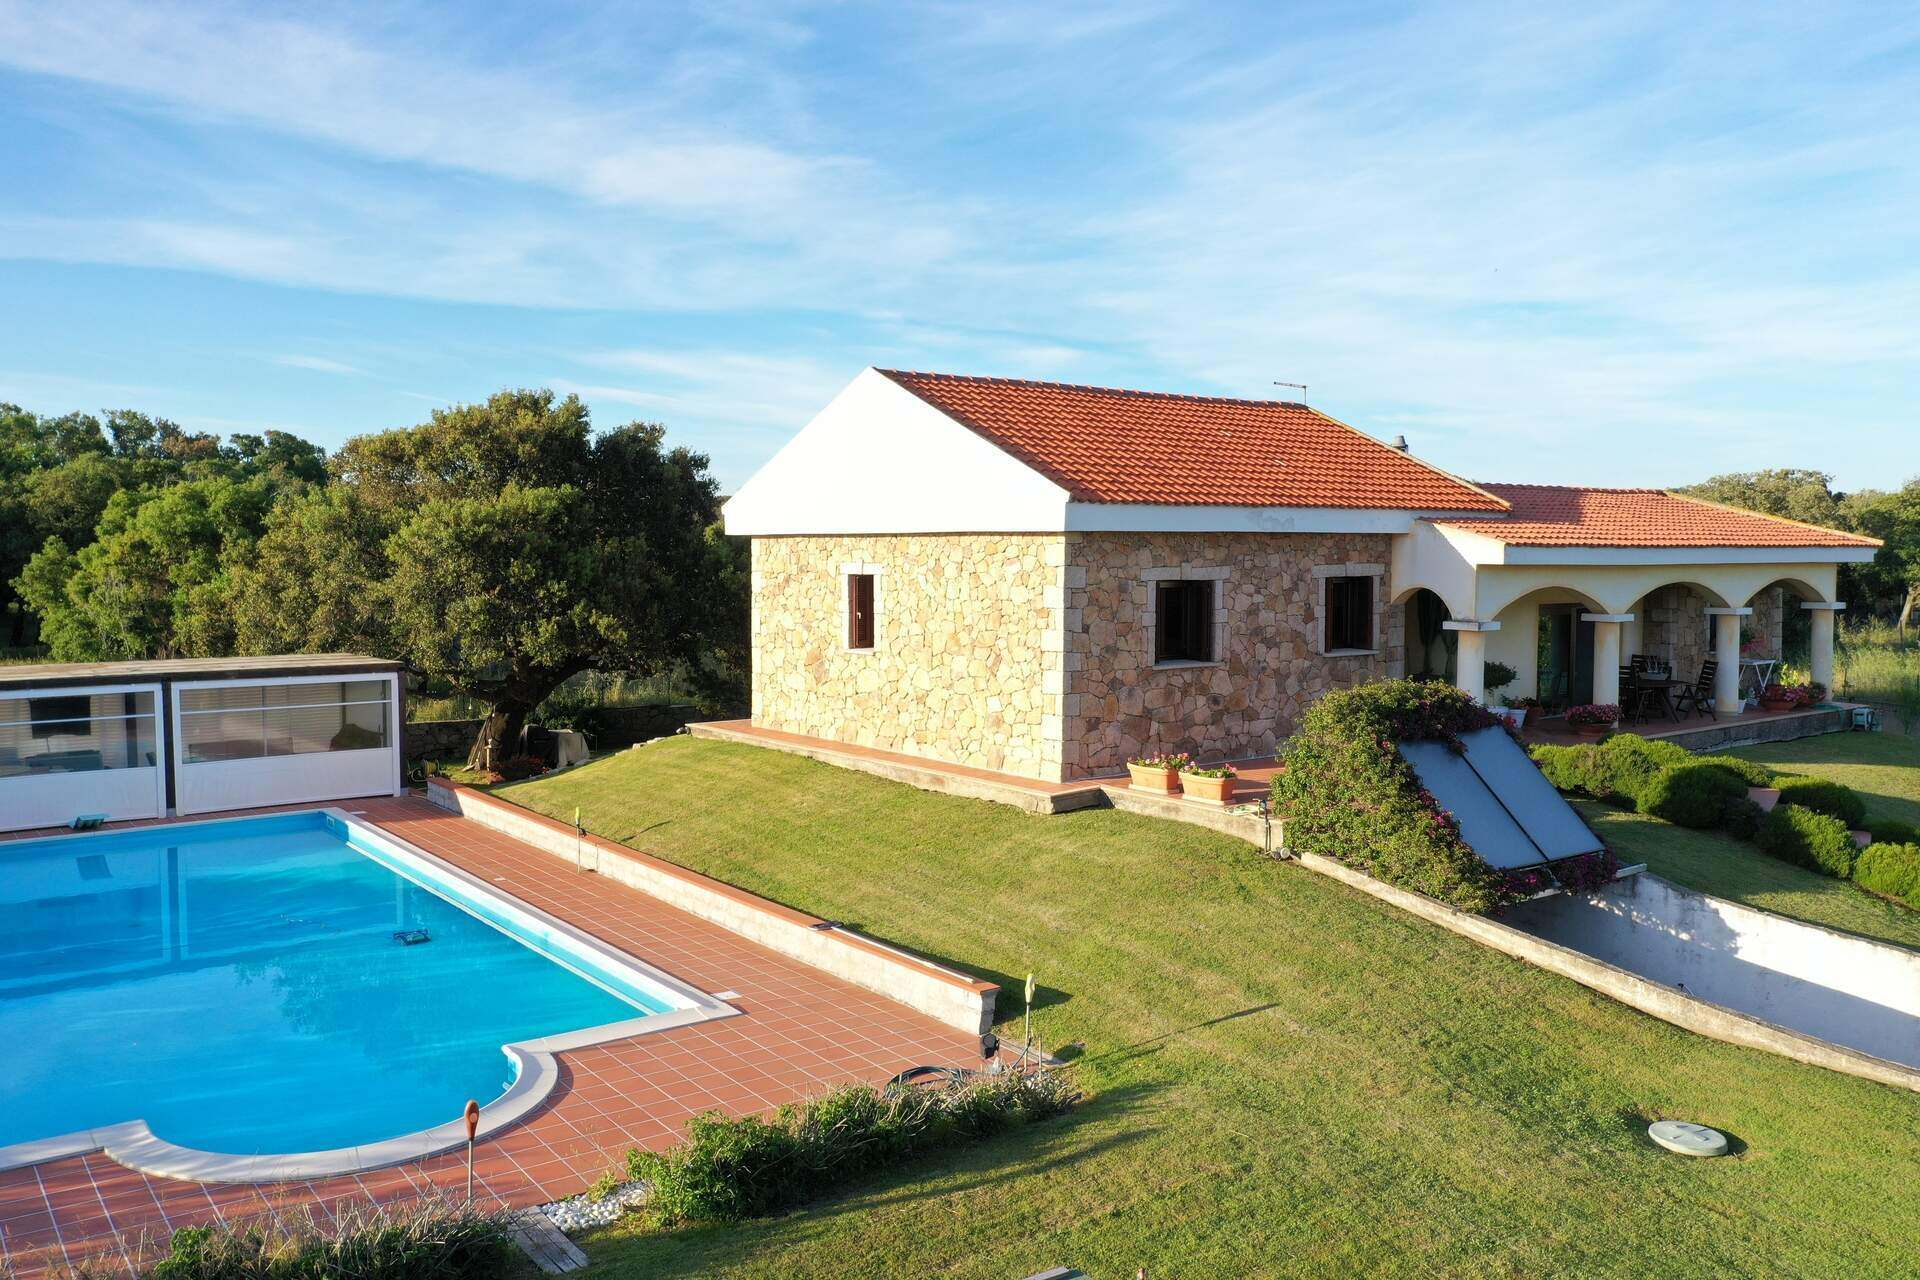 Villa with pool in the countryside Telti